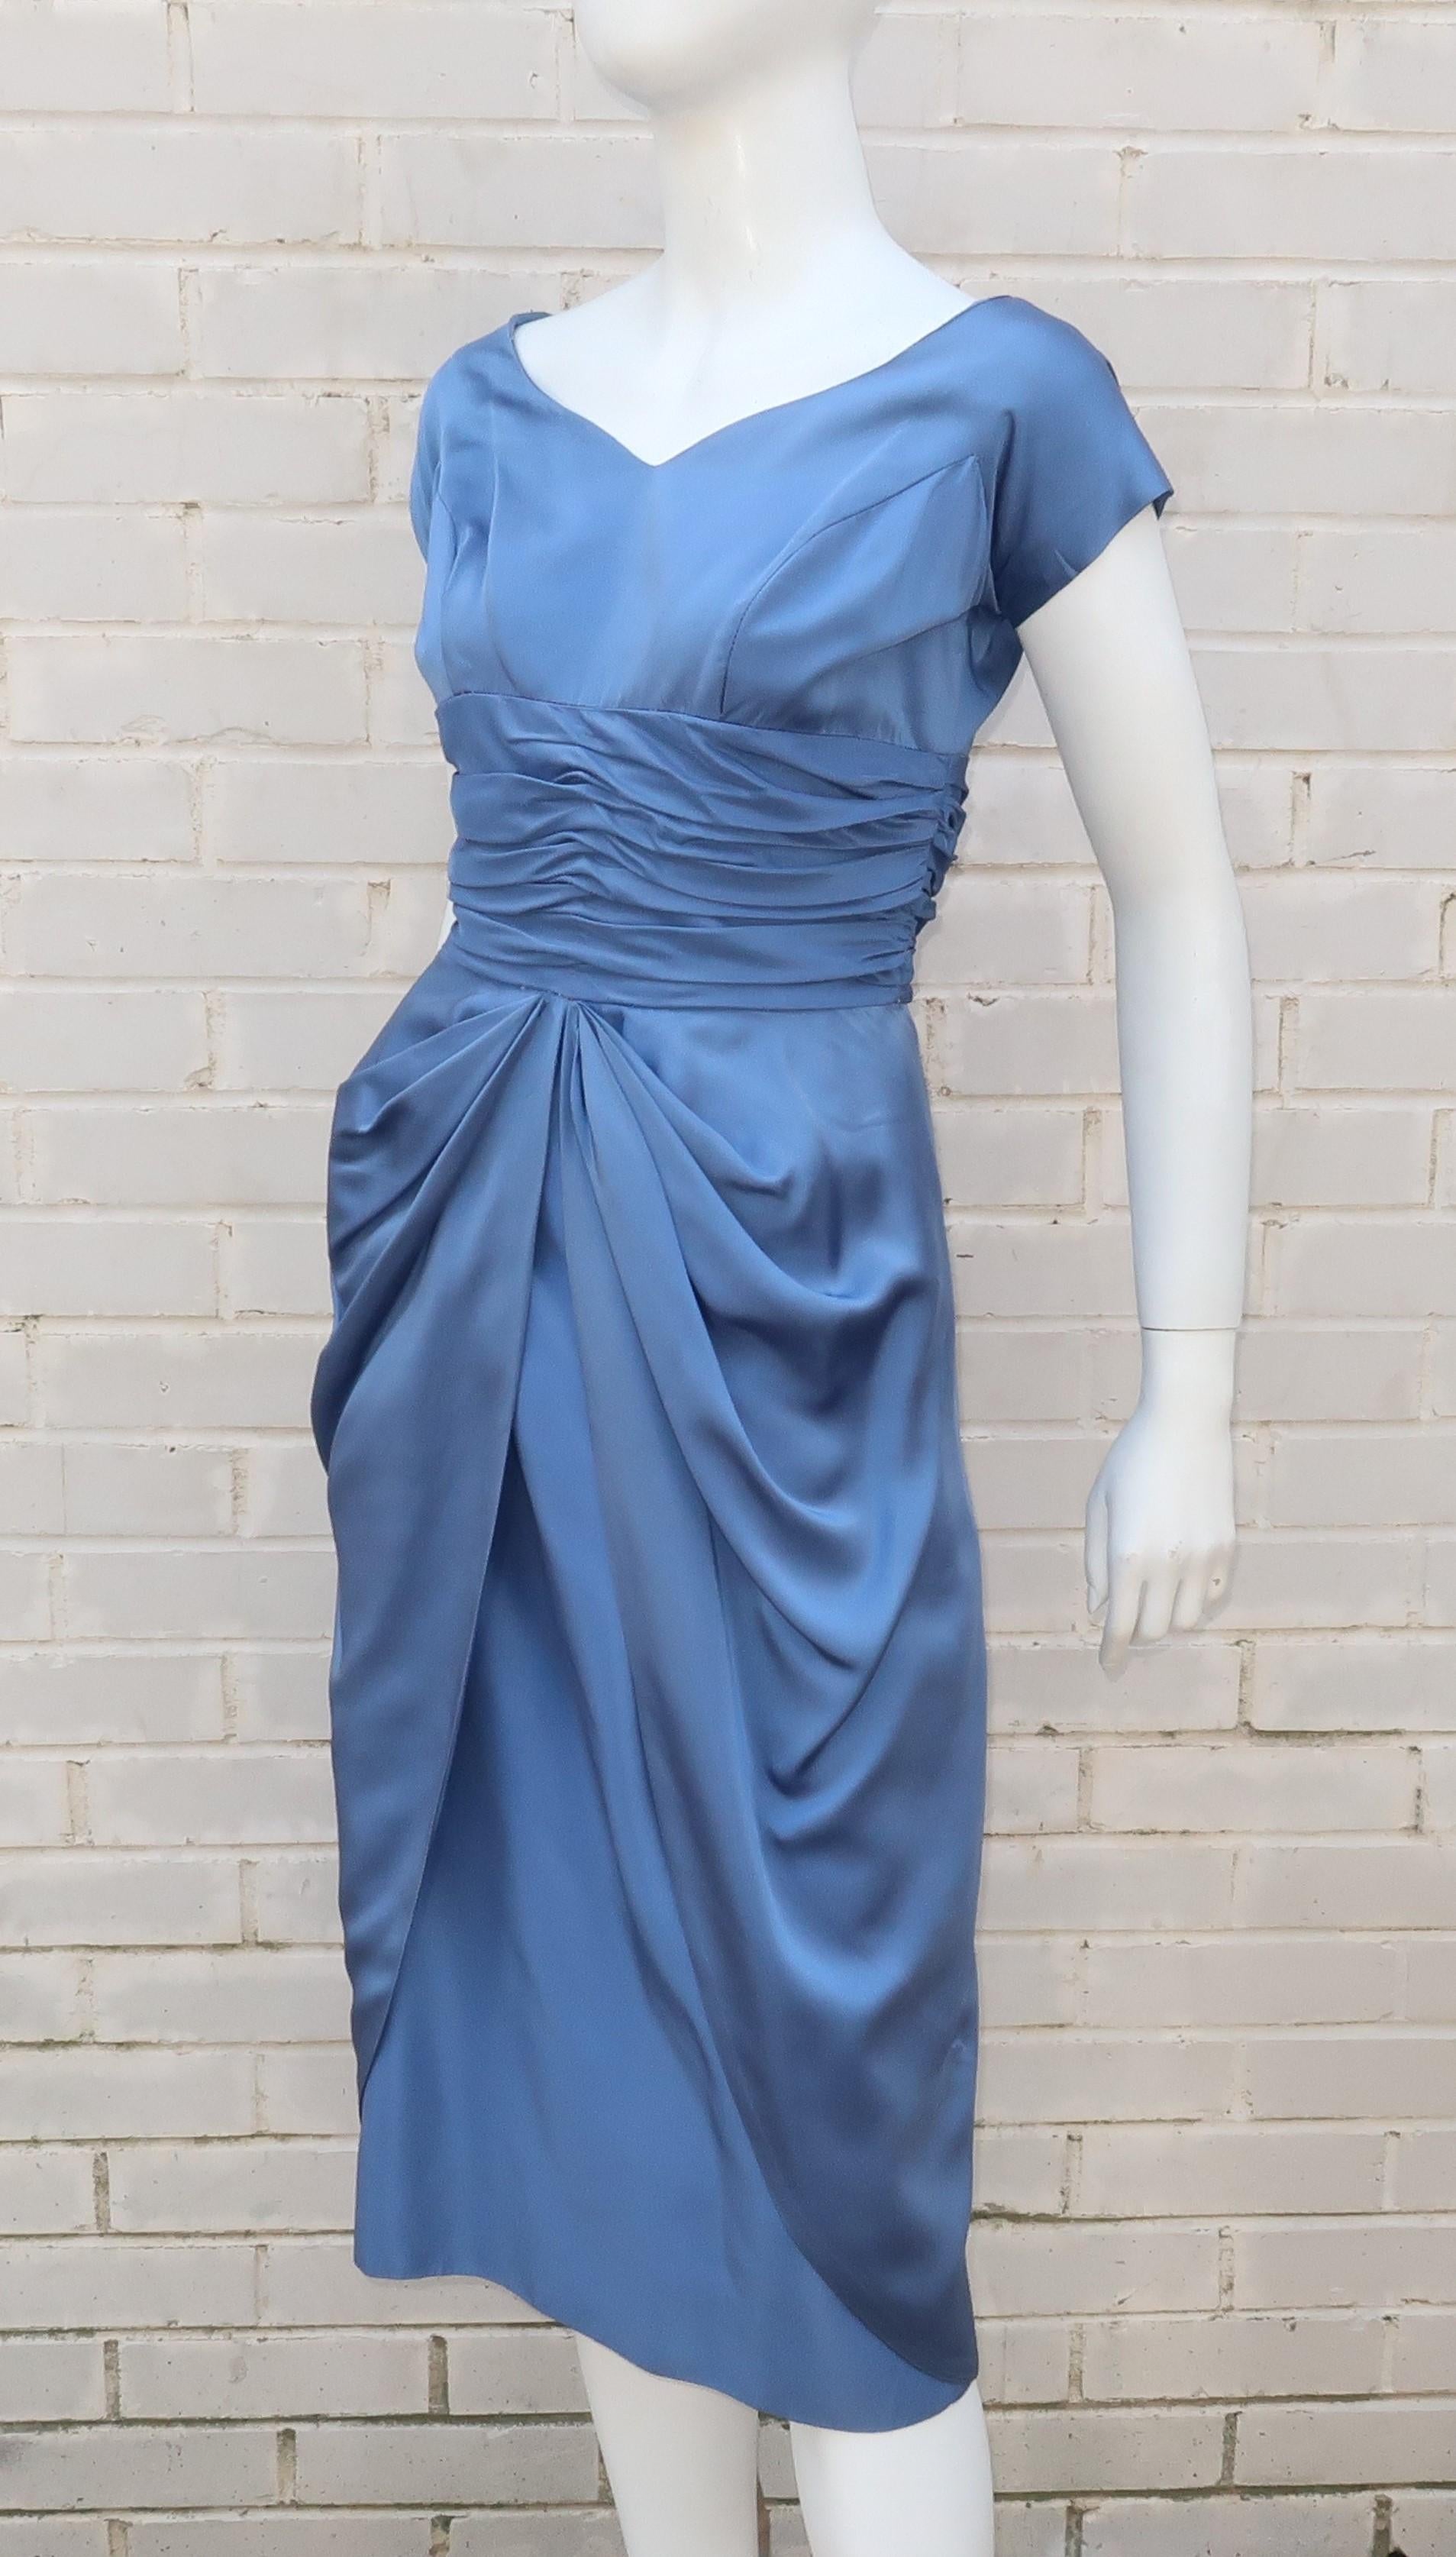 Emma Domb is the bomb!  This 1950’s bombshell dress is worthy of an houglass figure and a stylish cocktail party.  The icy periwinkle blue satin fabric is a beautiful backdrop for the ballerina style neckline and ruched empire waist accented with a